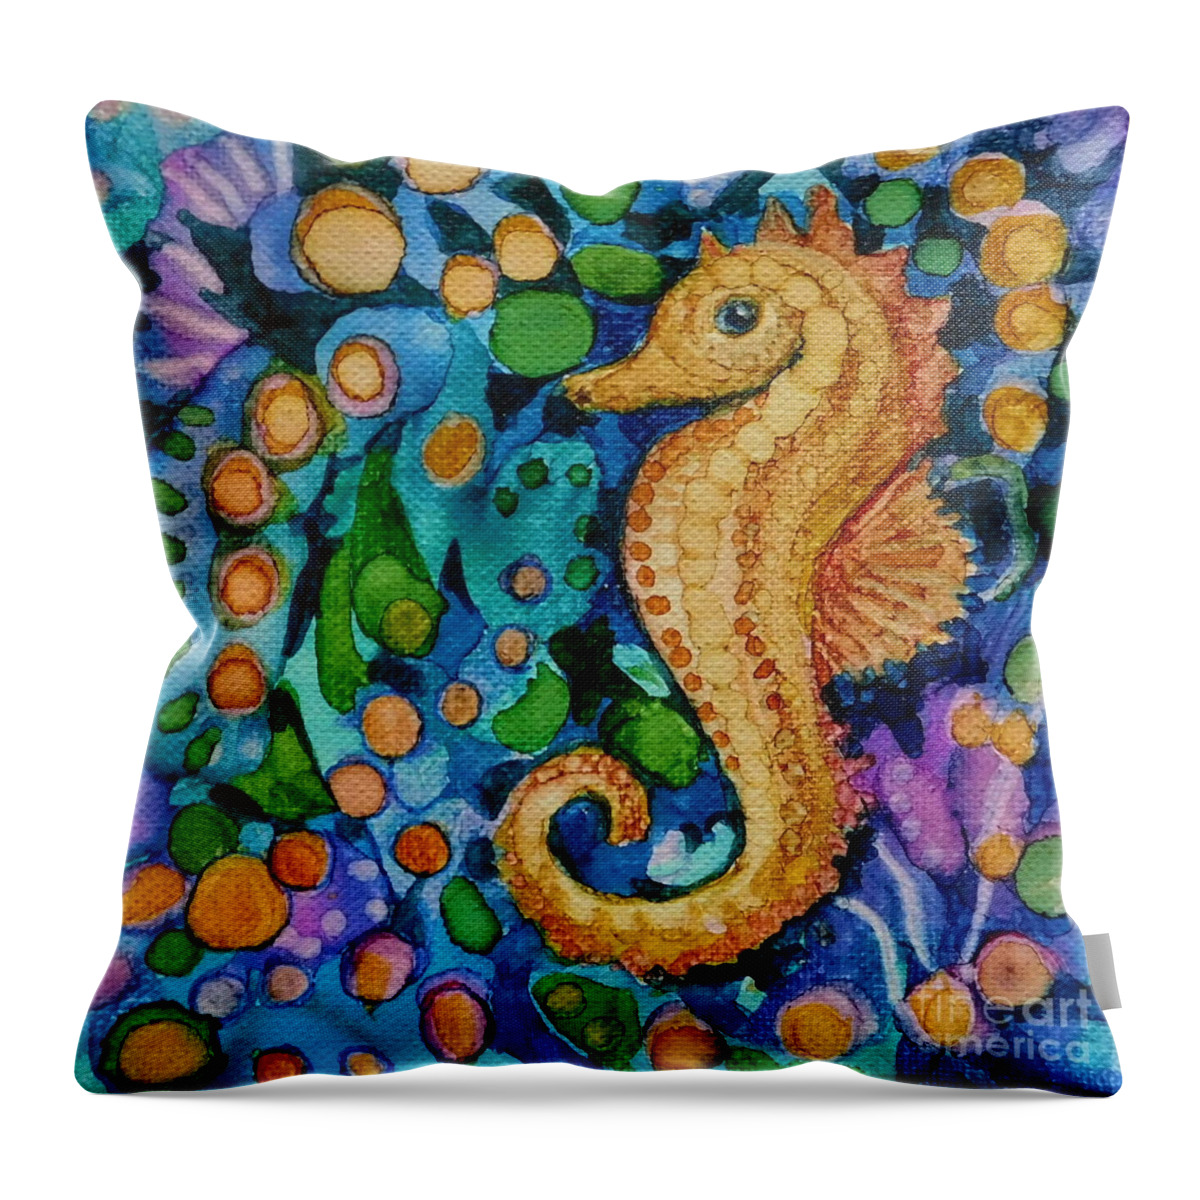 Bright Alcohol Ink Abstract Design Featuring A Golden Sea Horse Sliding Through A Sea Of Underwater Treasures In All The Colors Of The Rainbow. Six Inch Square Gallery-wrapped Canvas Is Ready To Hang. Throw Pillow featuring the painting Sea Steed by Joan Clear